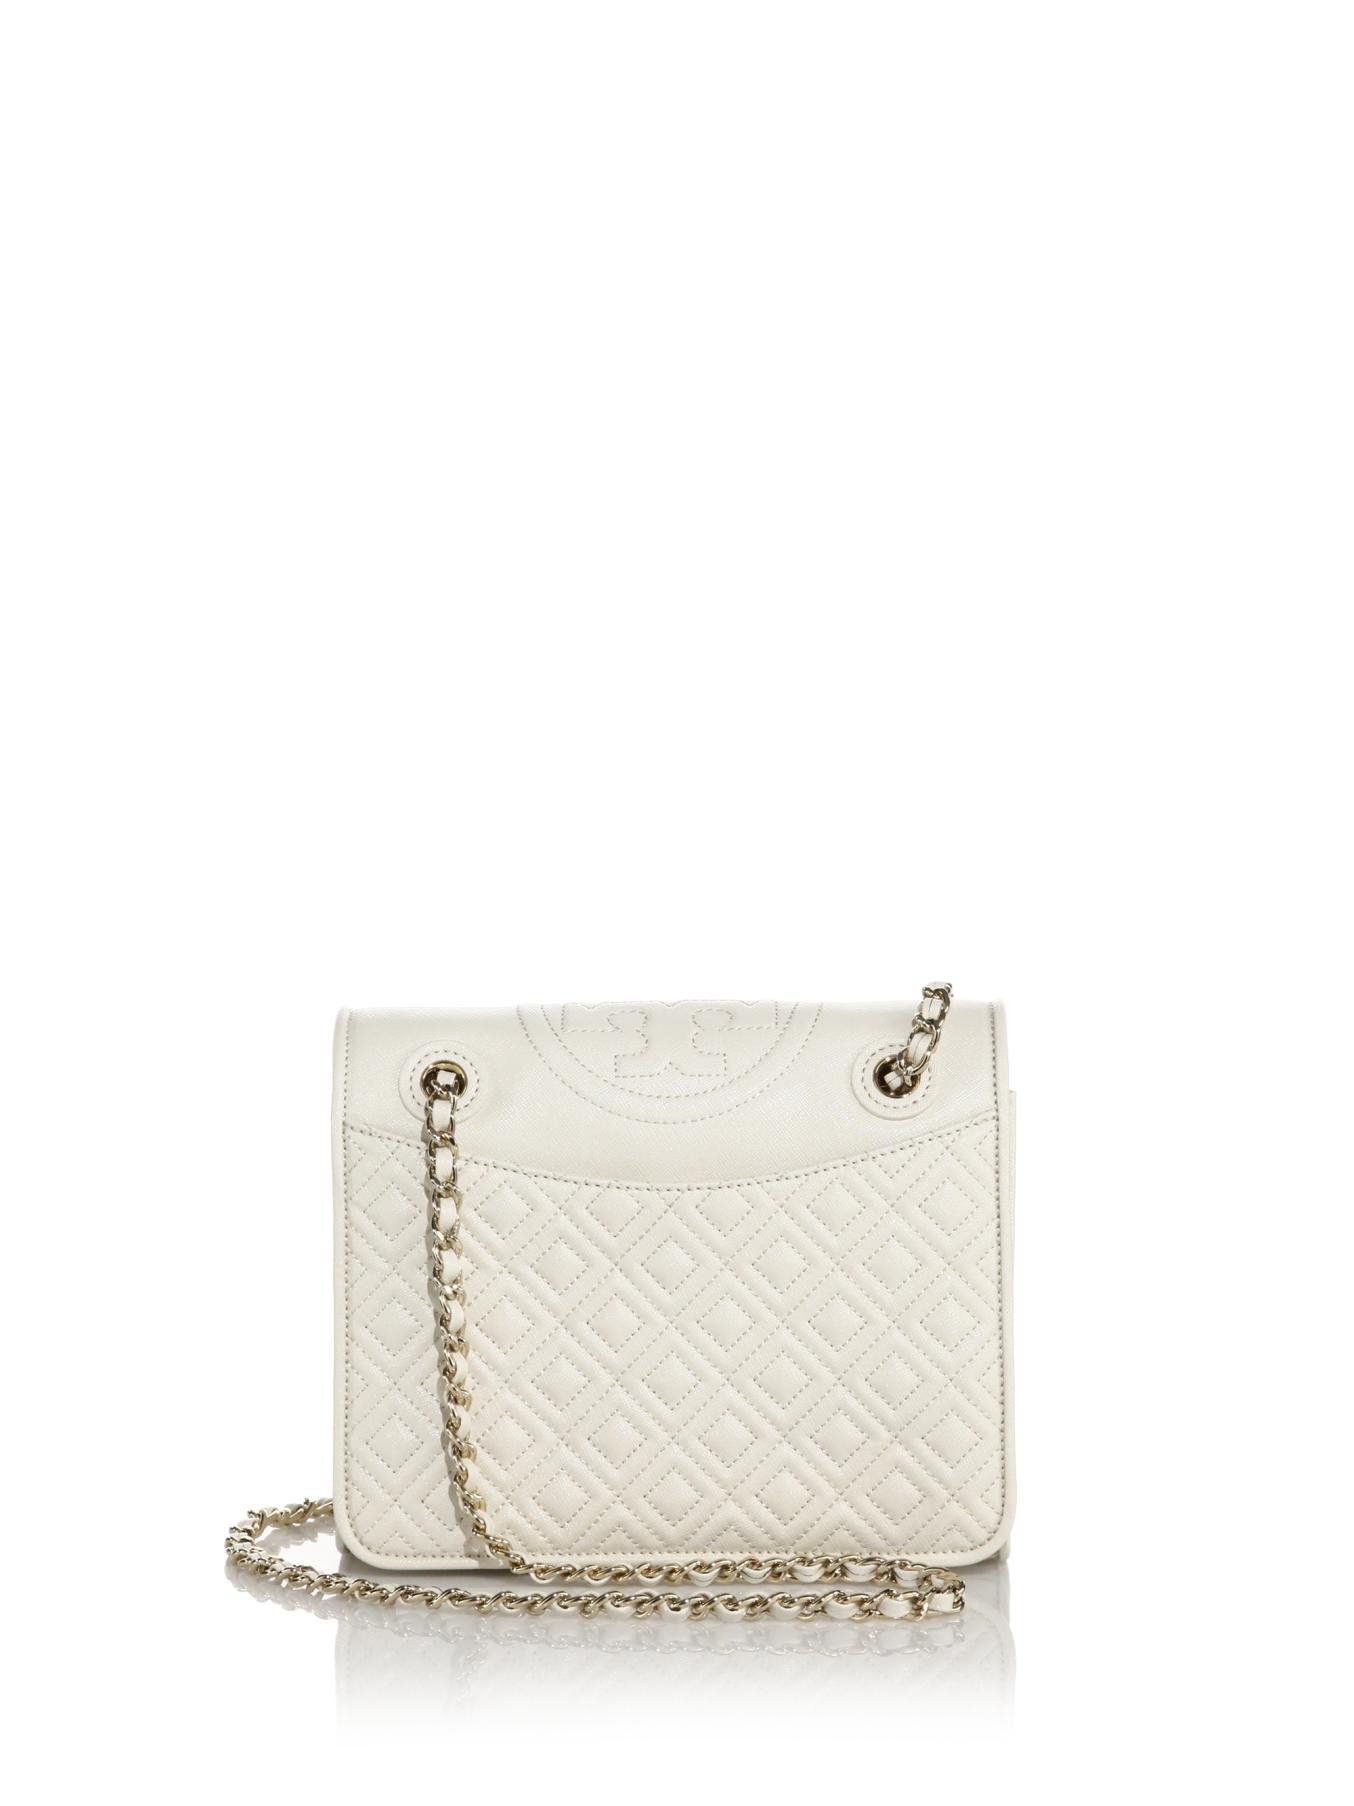 Lyst - Tory burch Fleming Patent Saffiano Leather Shoulder Bag in White